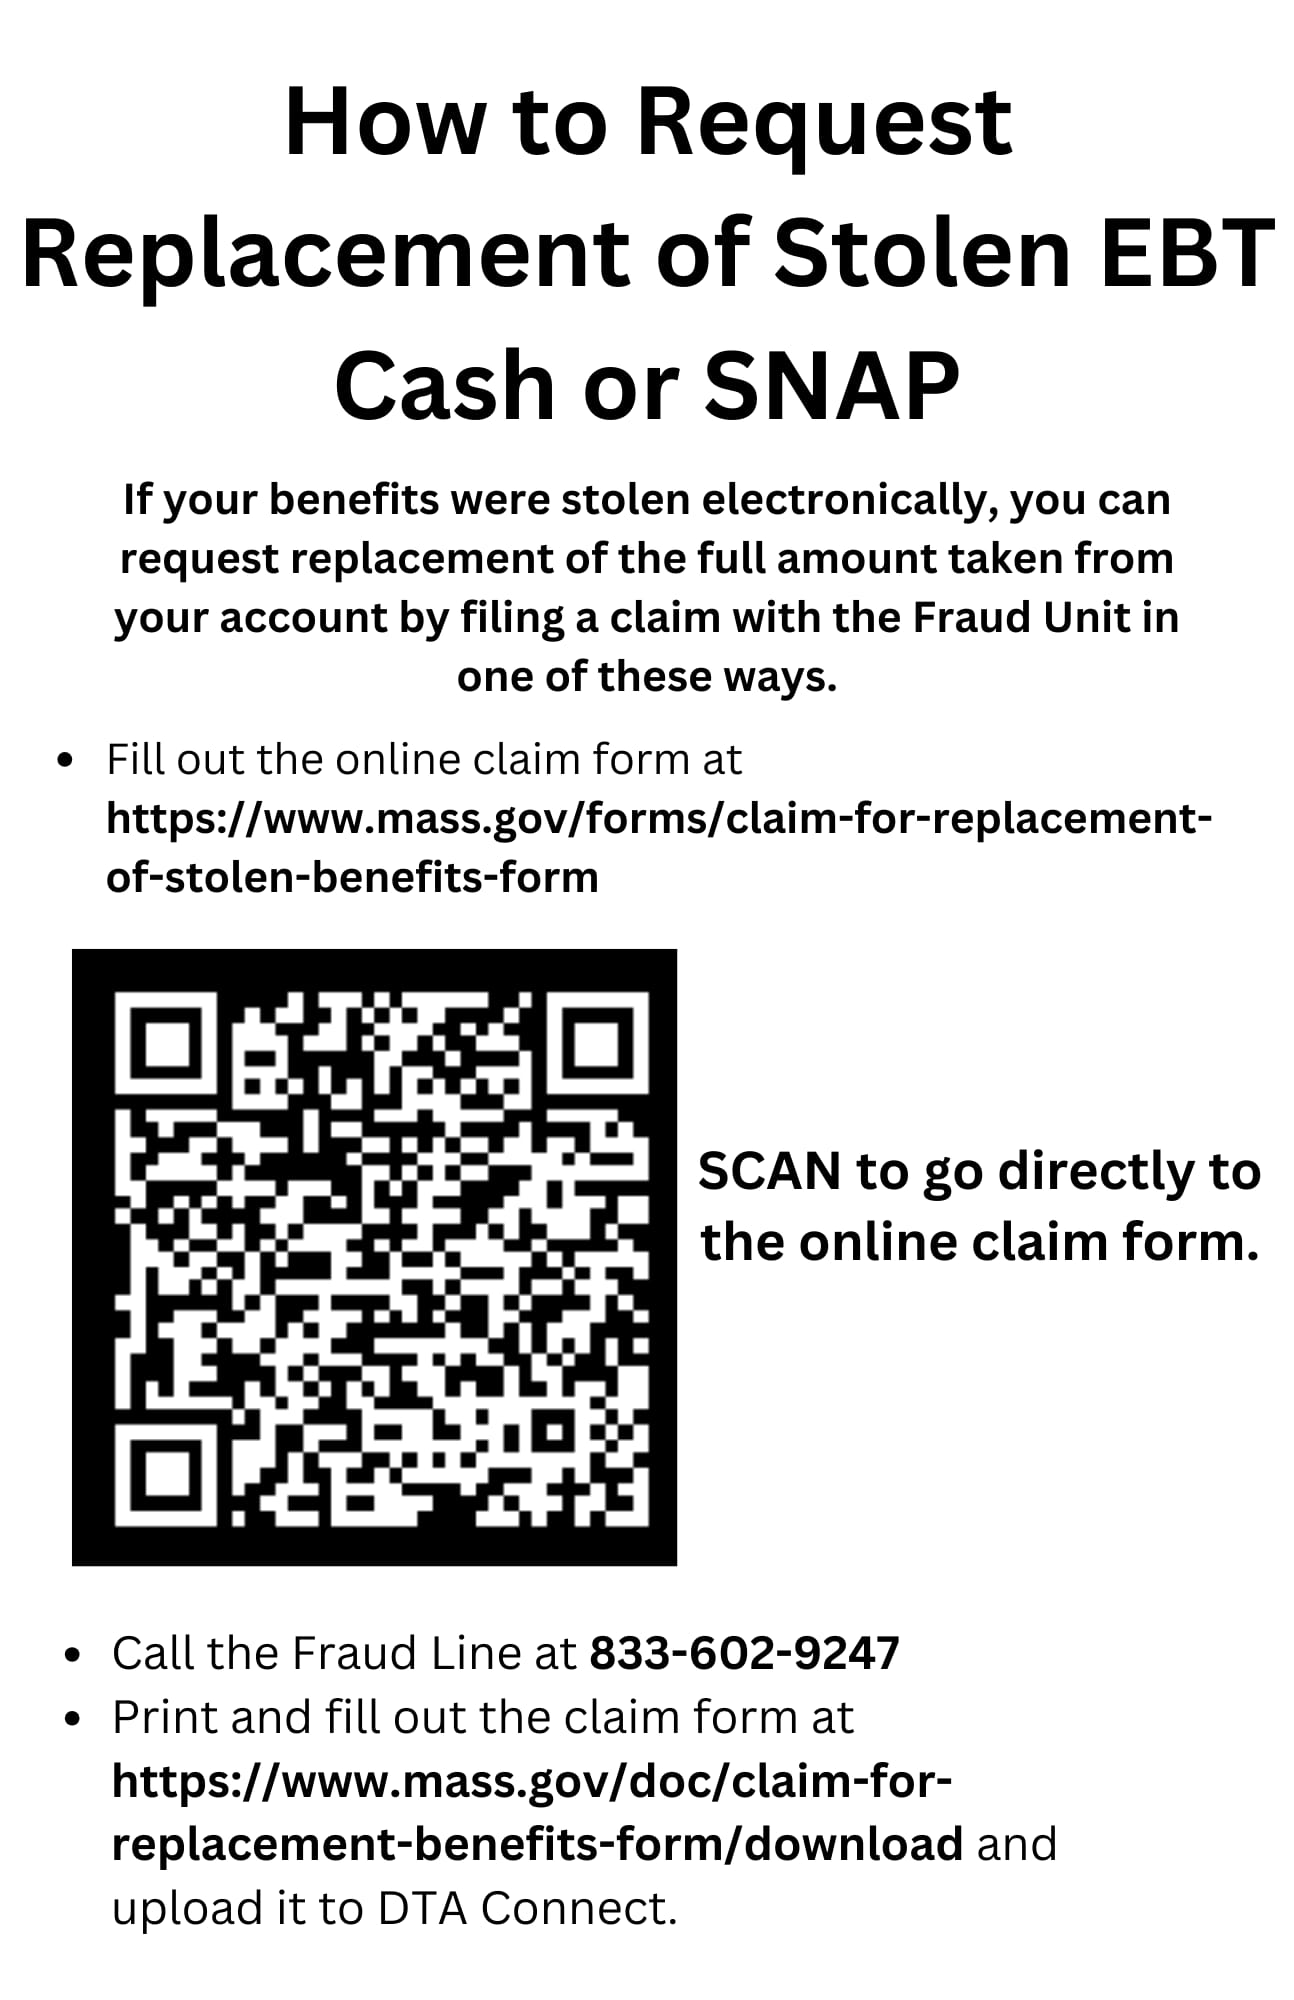 Infographic explaining how to submit a claim for stolen benefits to Mass DTA, including a QR code that goes directly to the online benefits claim form